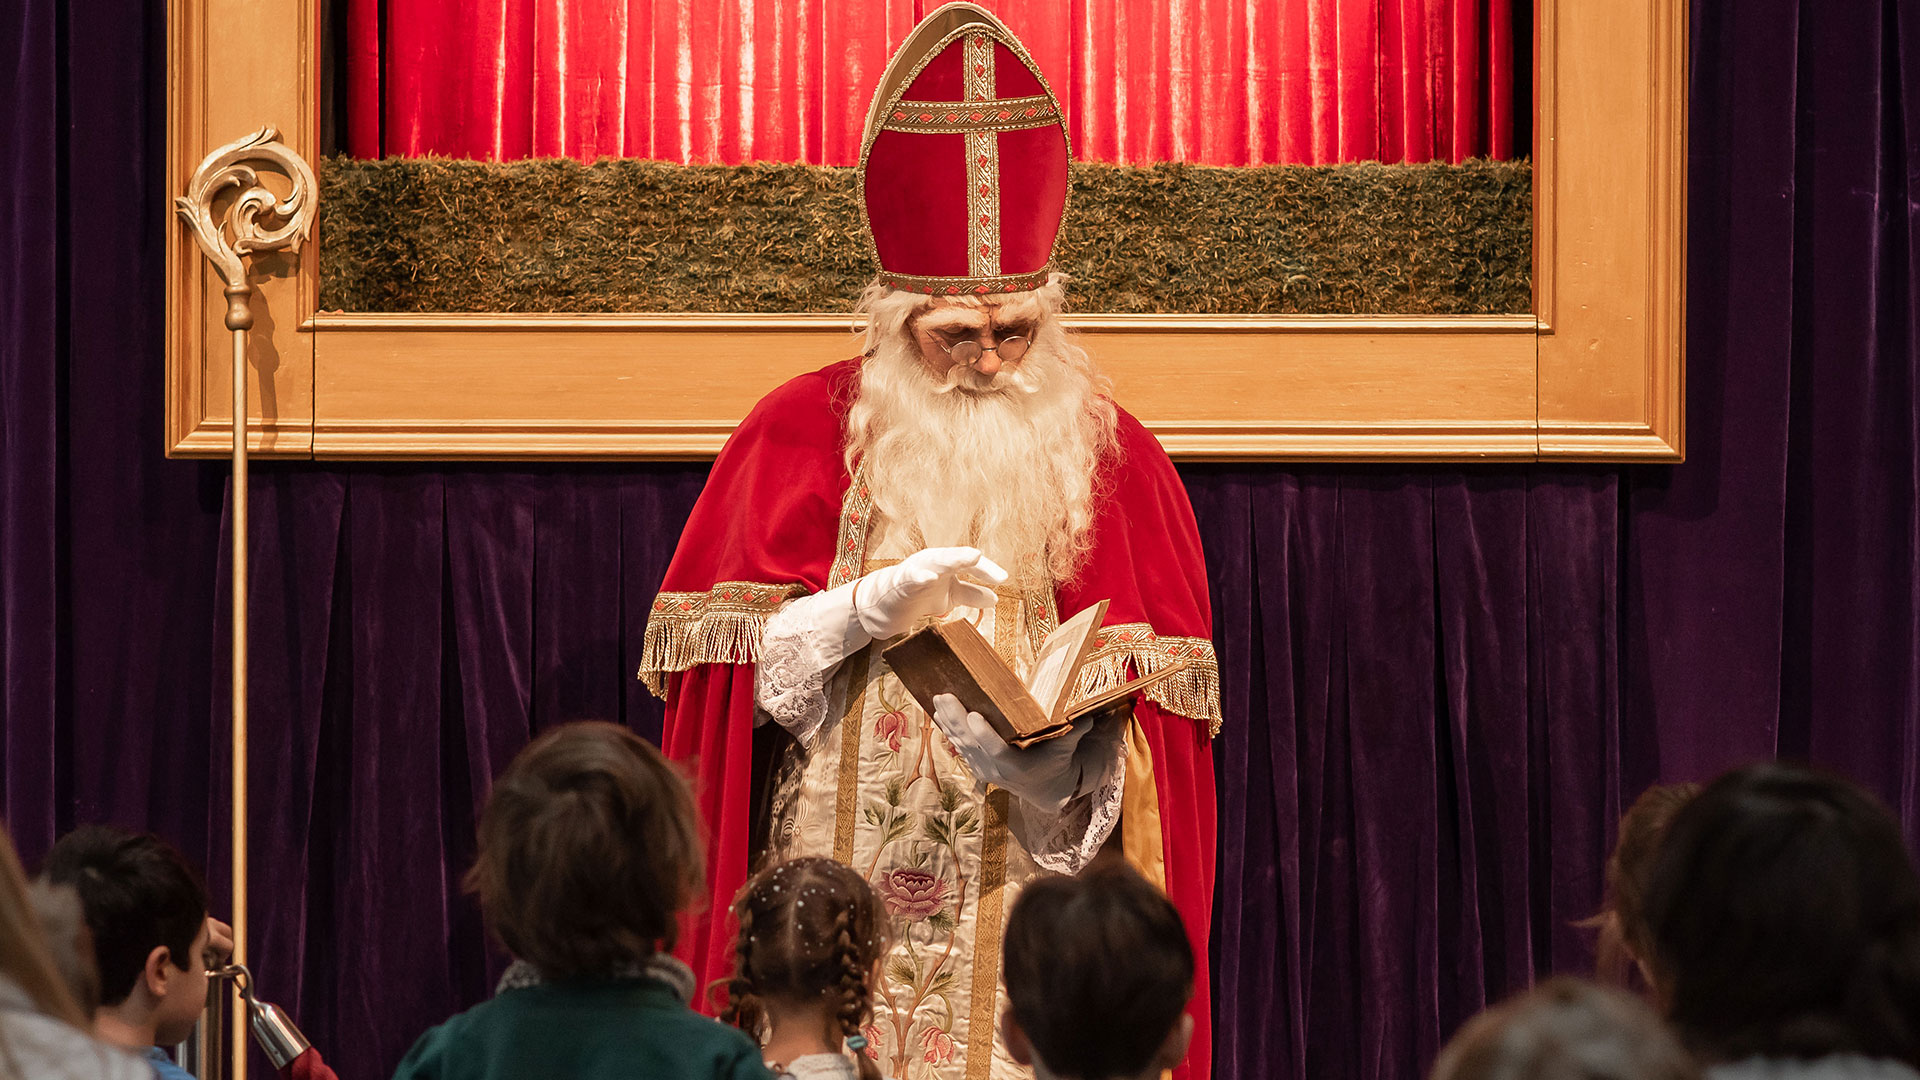 In Europe, Saint Nicholas looks more like the pope than a jolly old elf with a round belly.